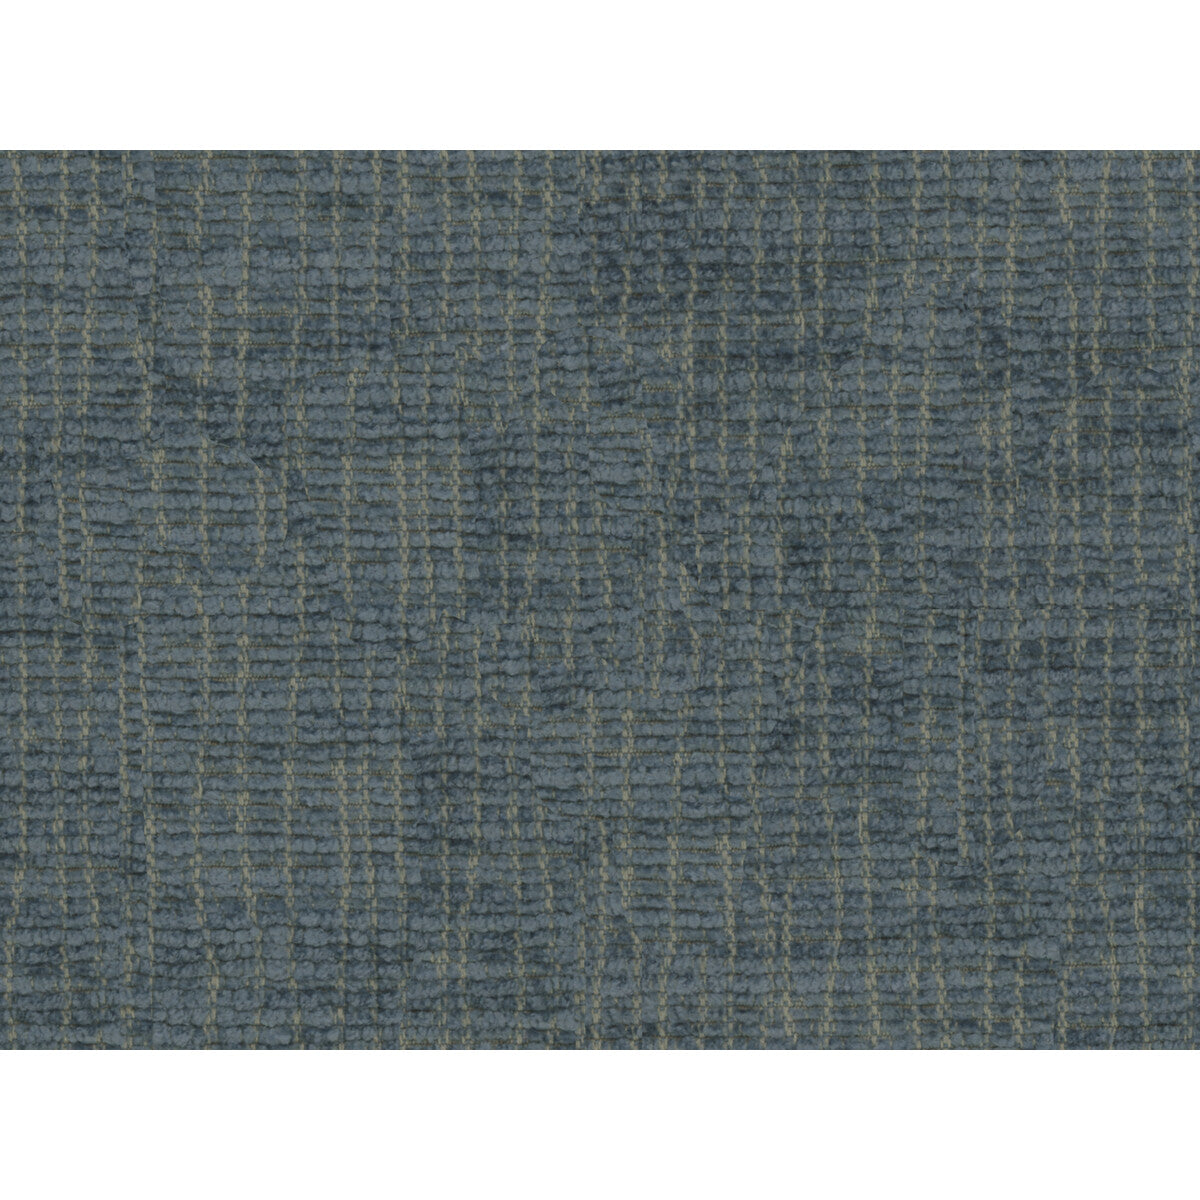 Clever Cut fabric in capri color - pattern 34456.5.0 - by Kravet Couture